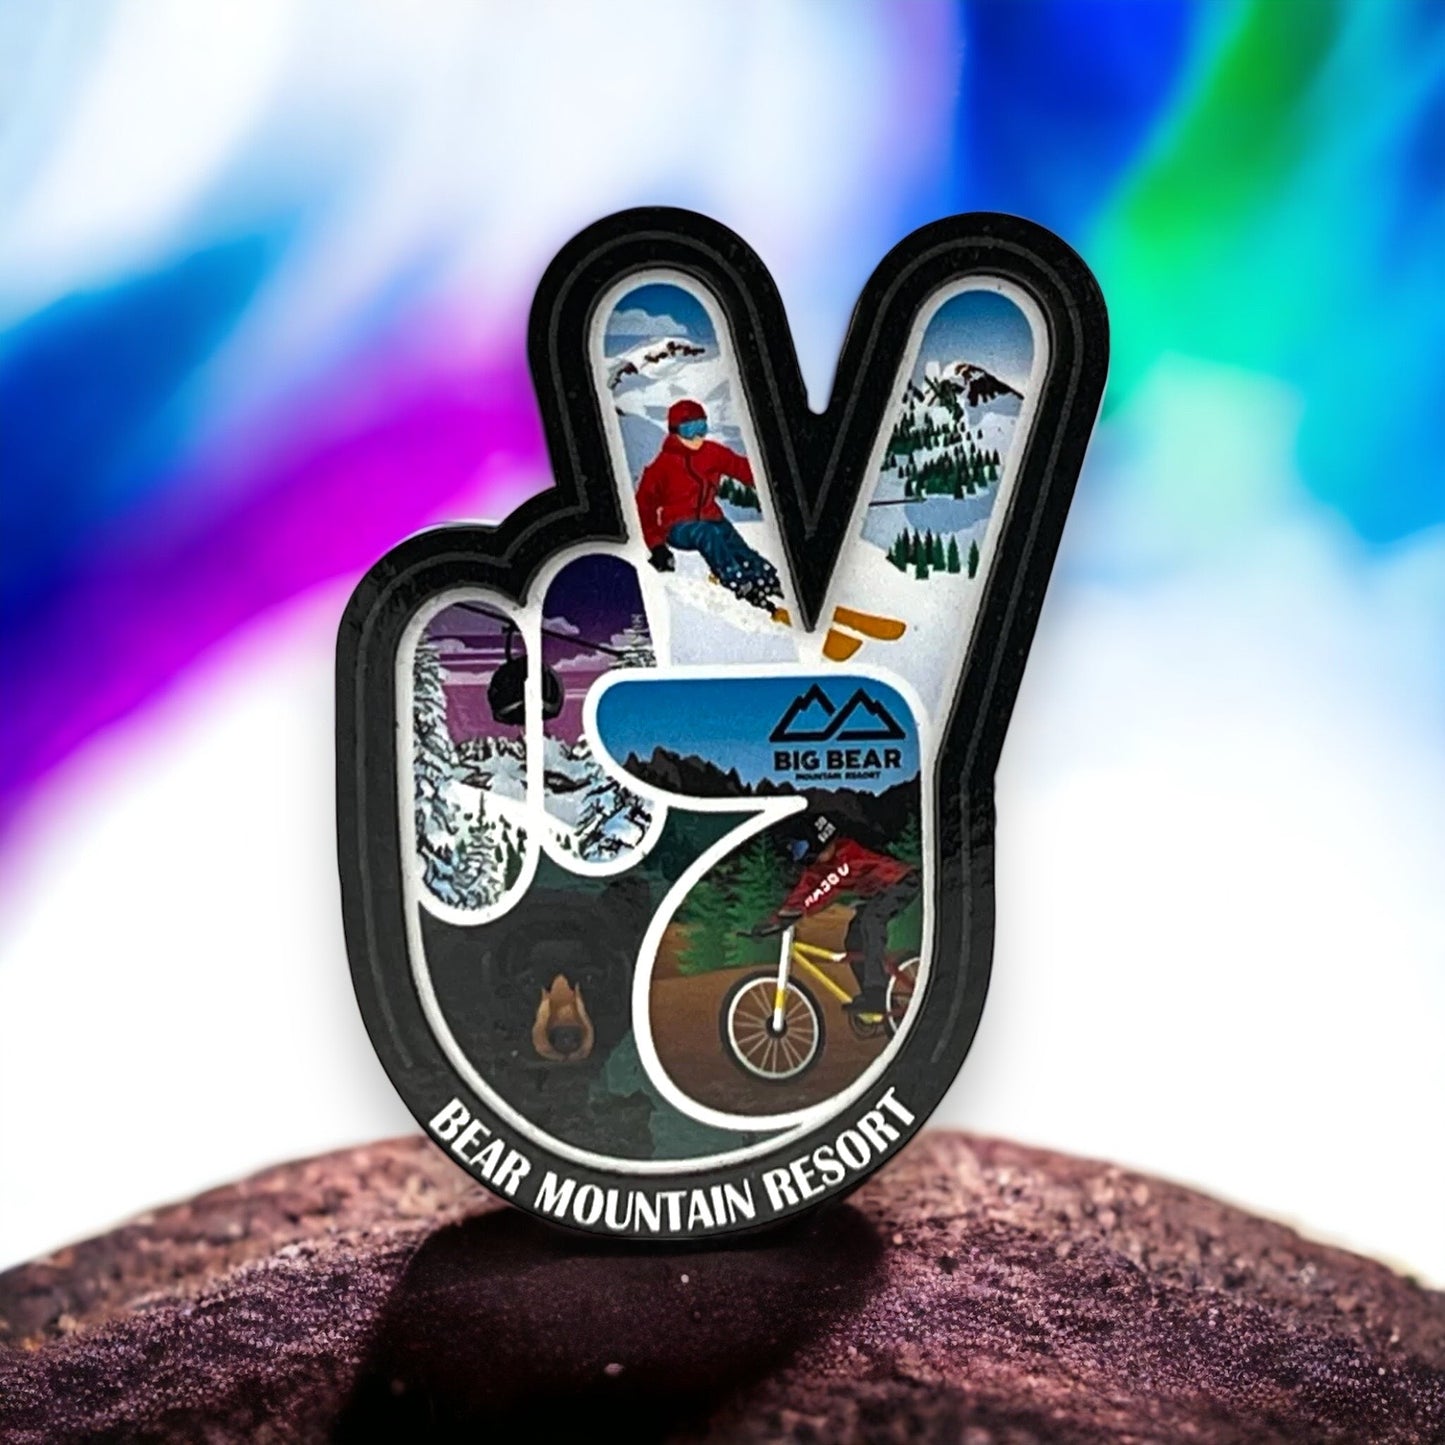 Hand peace sign shaped magnet with winter sports theme inside